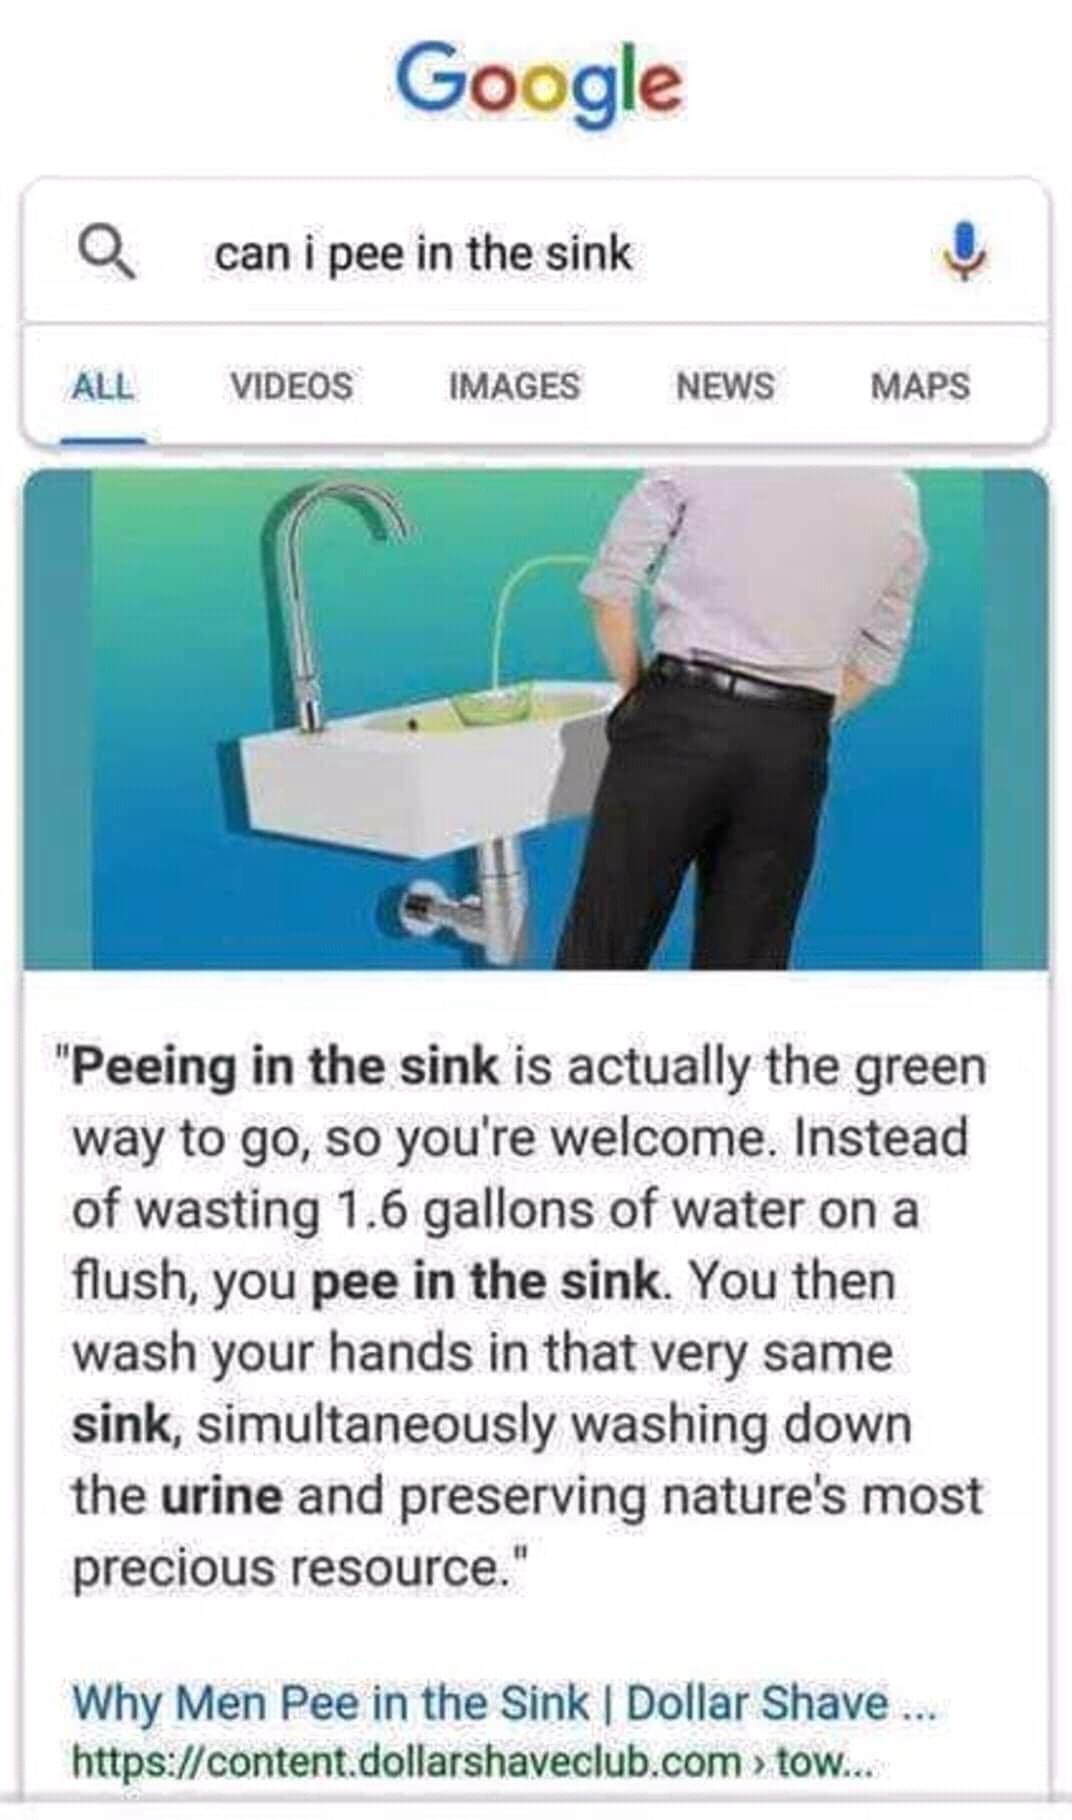 peeing in the sink - Google a can i pee in the sink All Videos Images News Maps "Peeing in the sink is actually the green way to go, so you're welcome. Instead of wasting 1.6 gallons of water on a flush, you pee in the sink. You then wash your hands in th